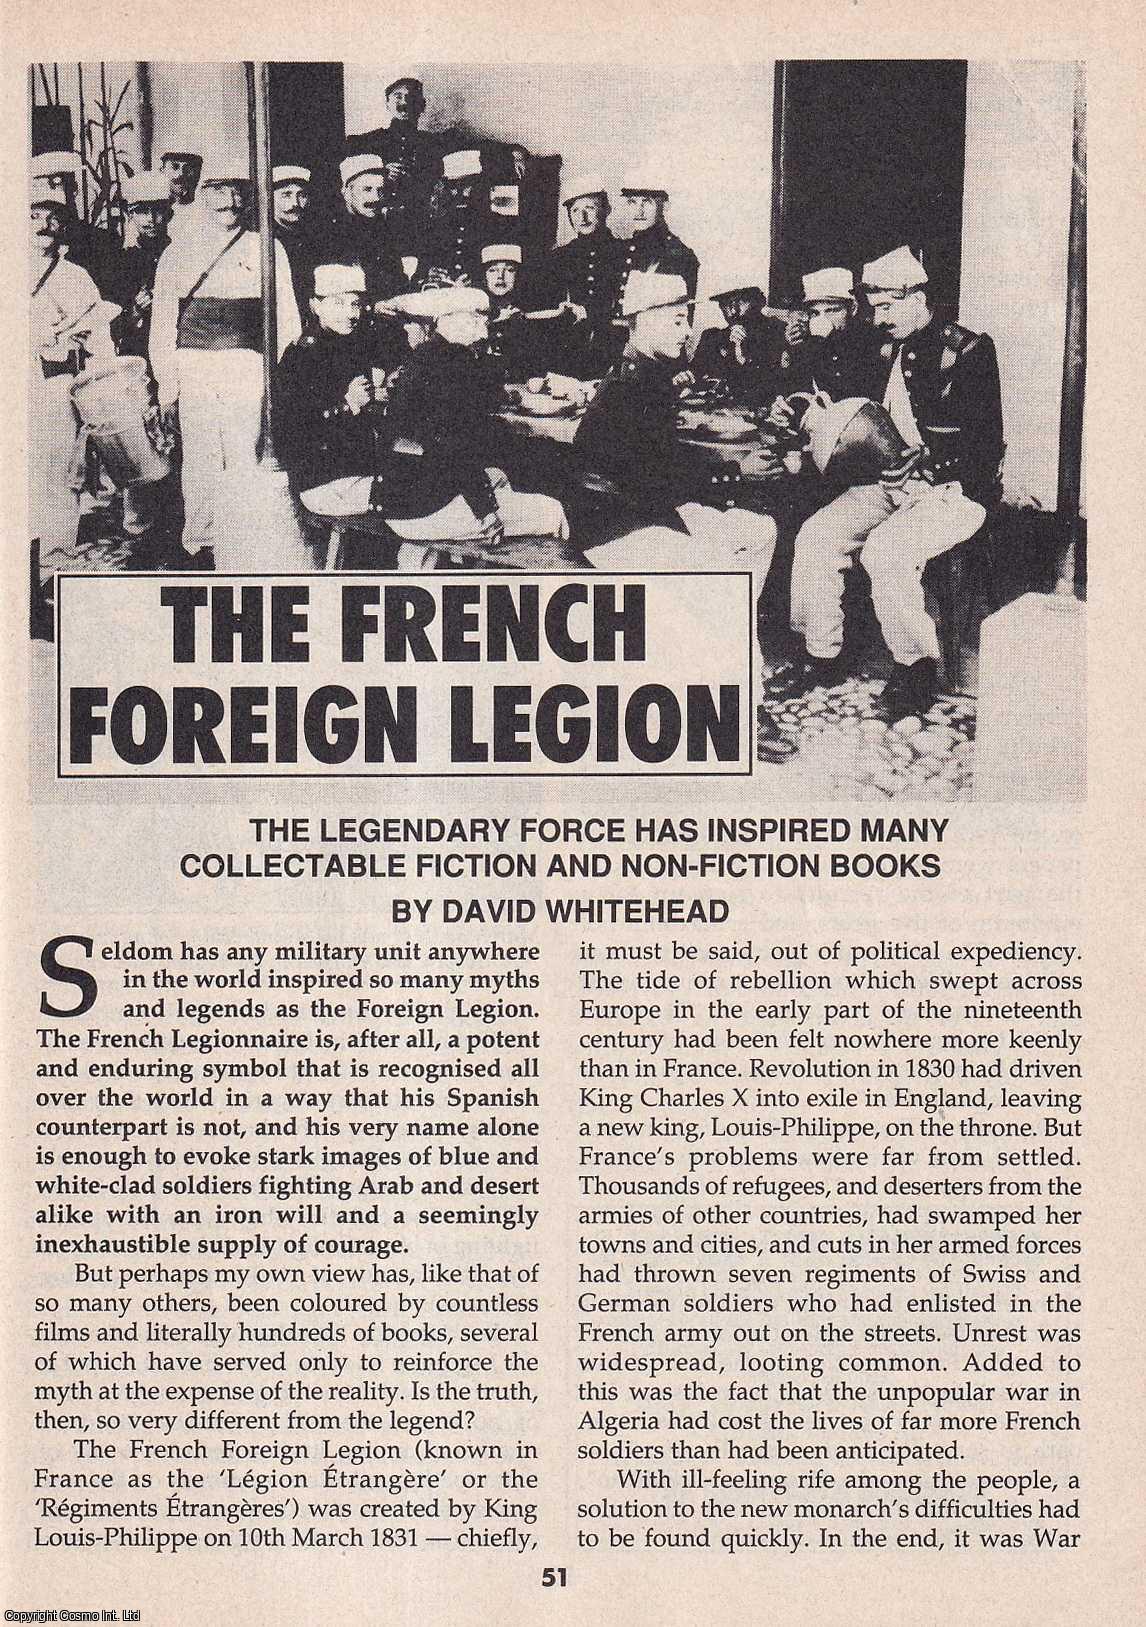 David Whitehead - The French Foreign Legion : Collectable Fiction & Non-Fiction Books. This is an original article separated from an issue of The Book & Magazine Collector publication.